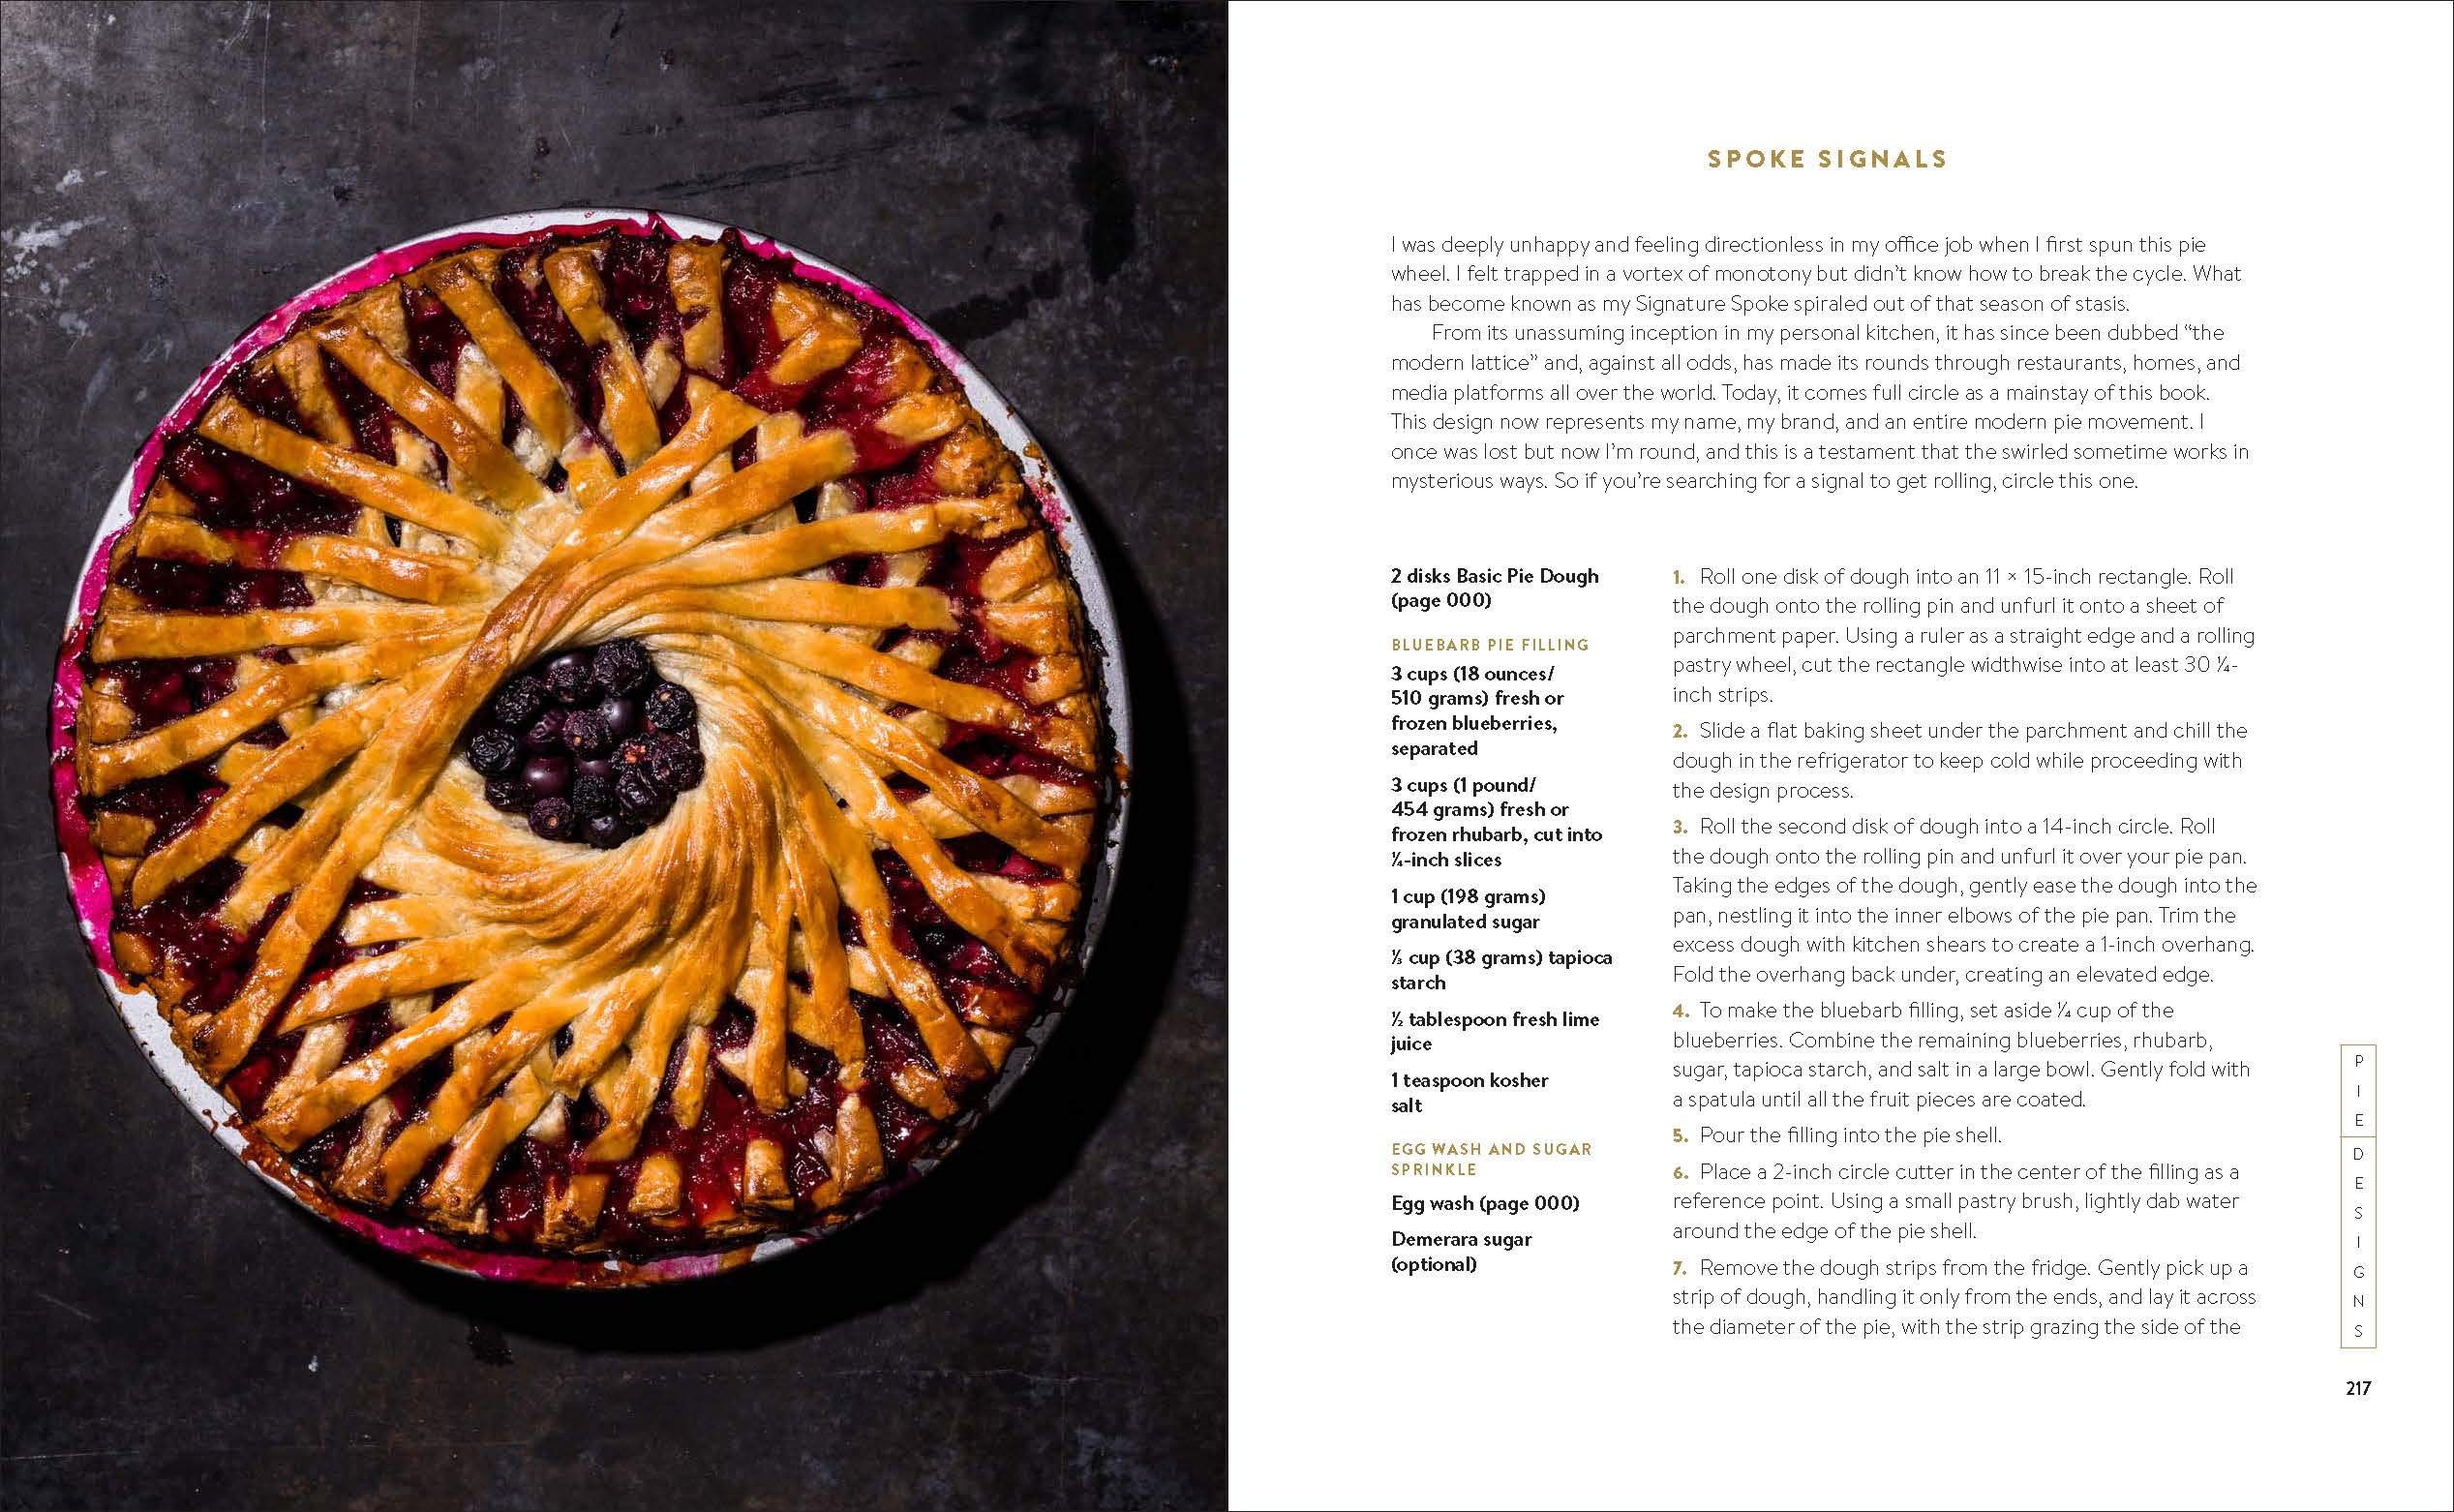 Pieometry: Modern Tart Art and Pie Design for the Eye and the Palate